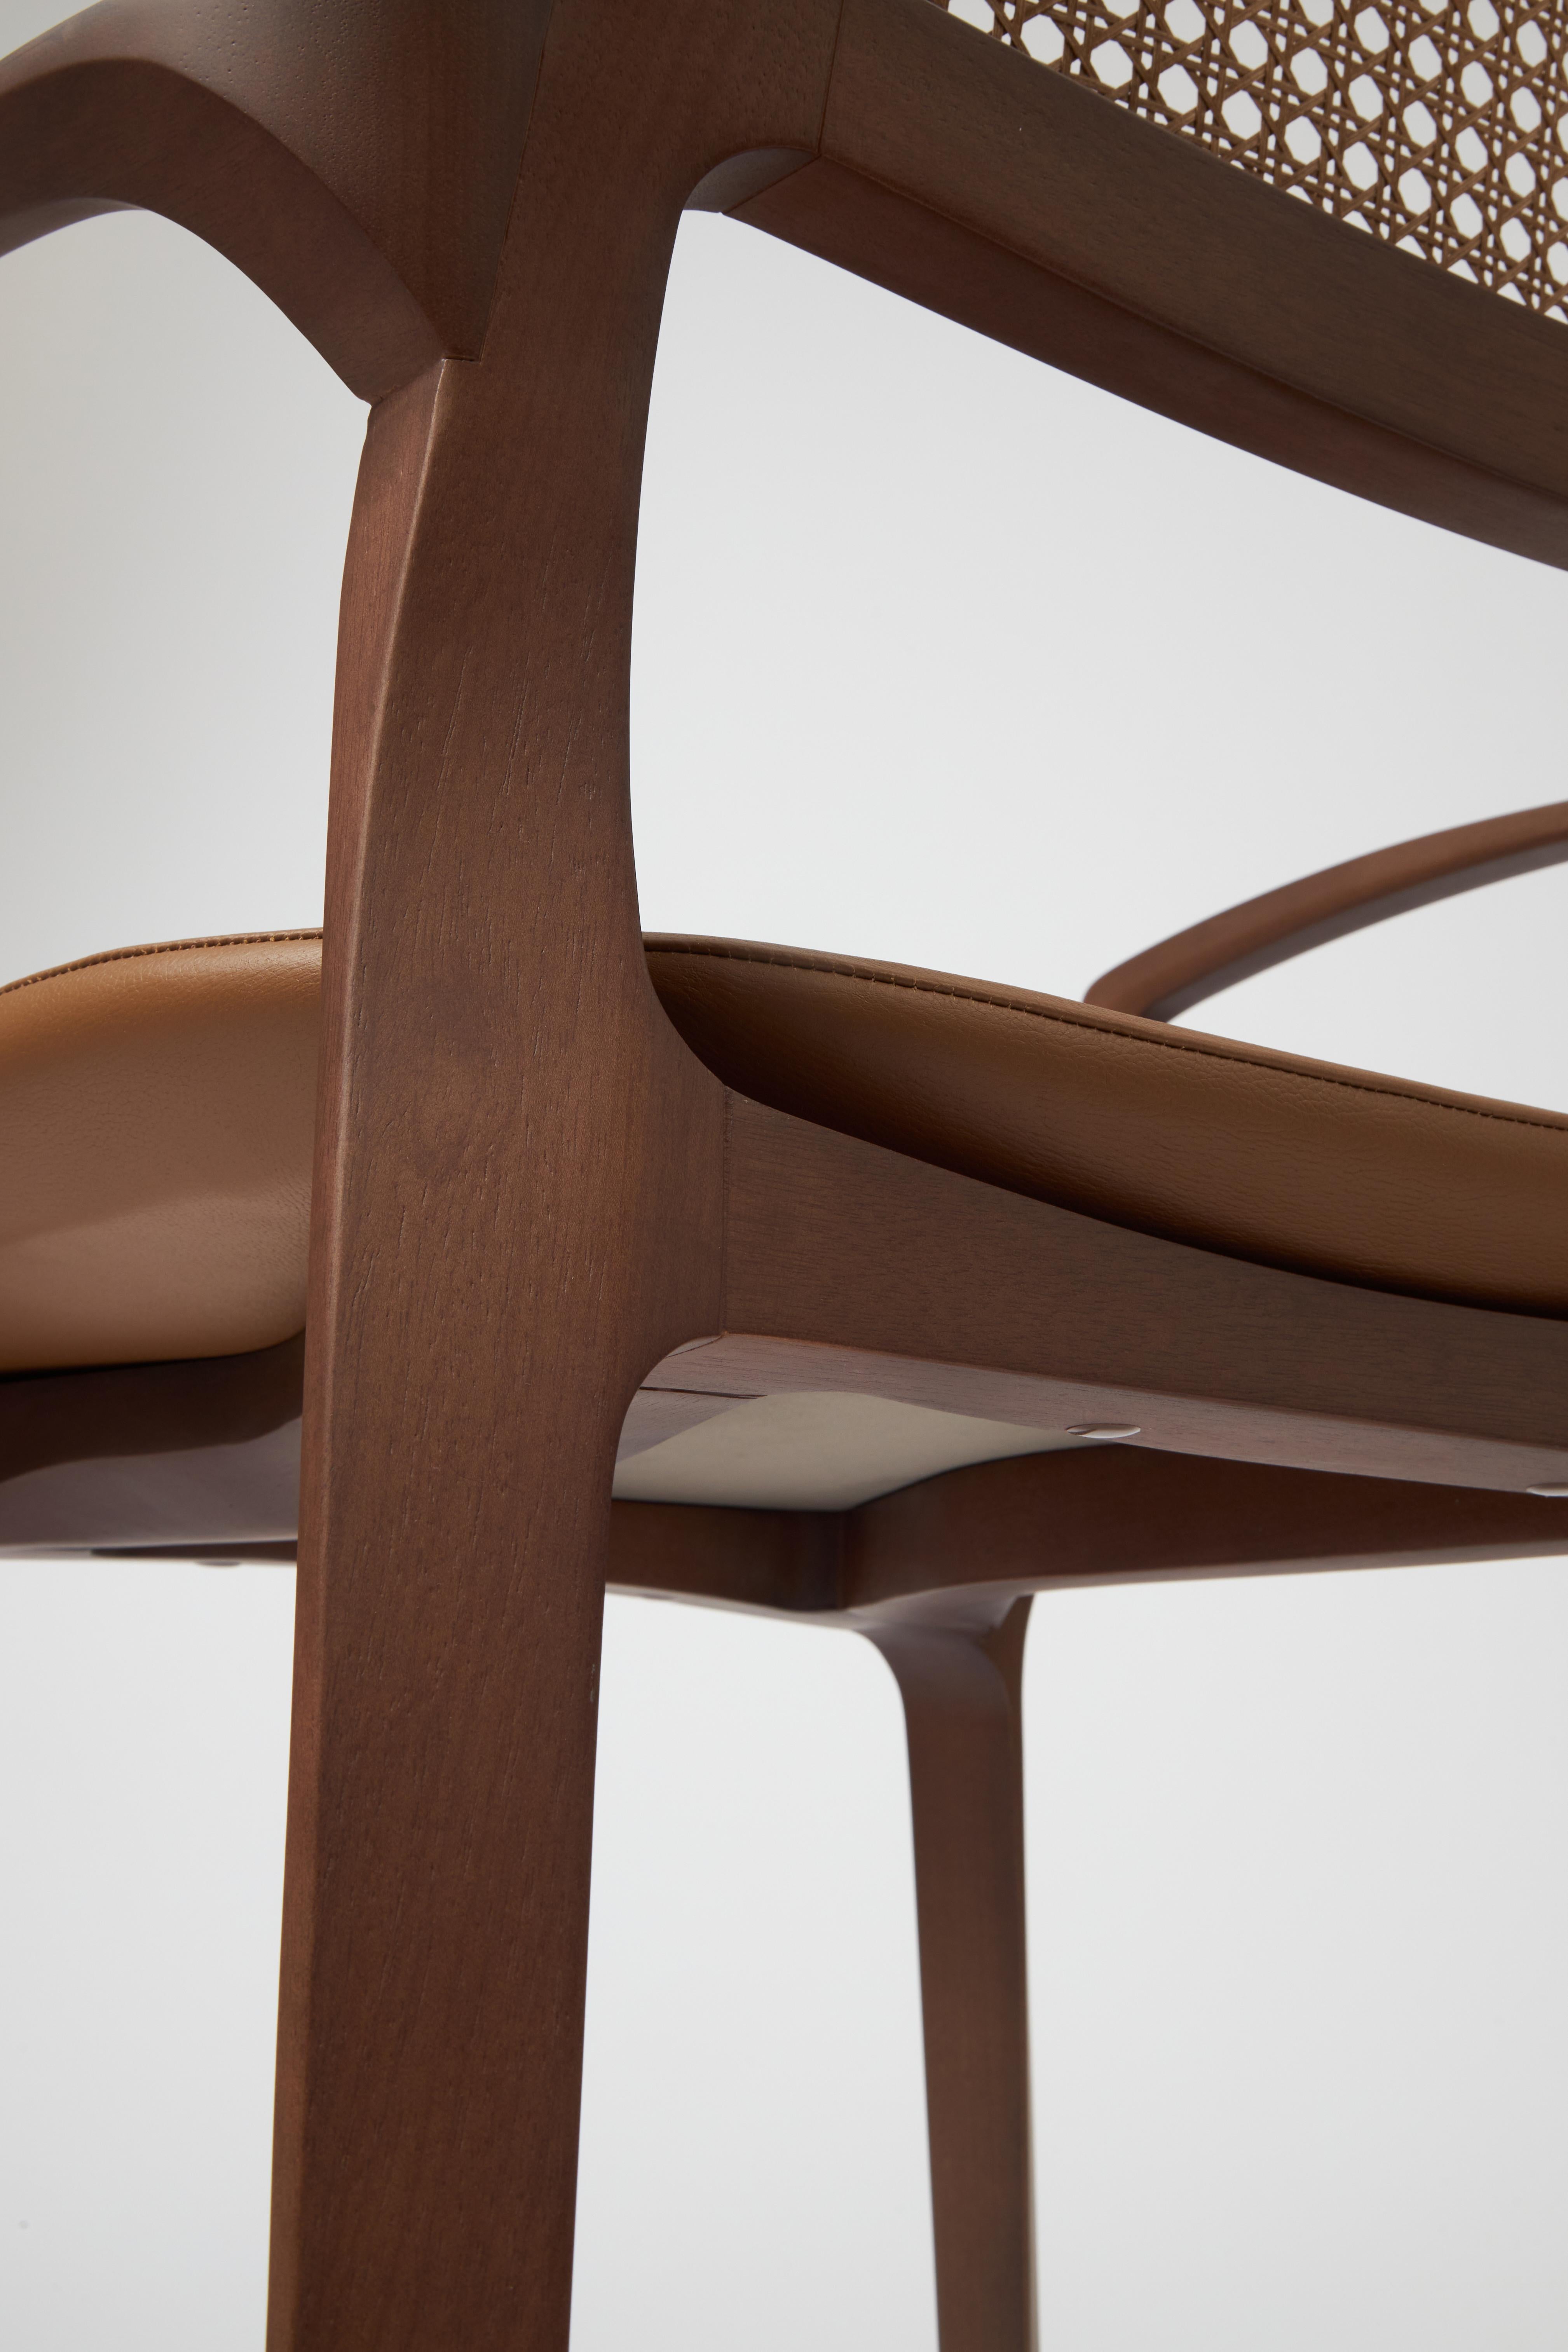 Cuir The Moderns Aurora Chair Sculptured in Walnut Finish Arms, leather seating, cane en vente